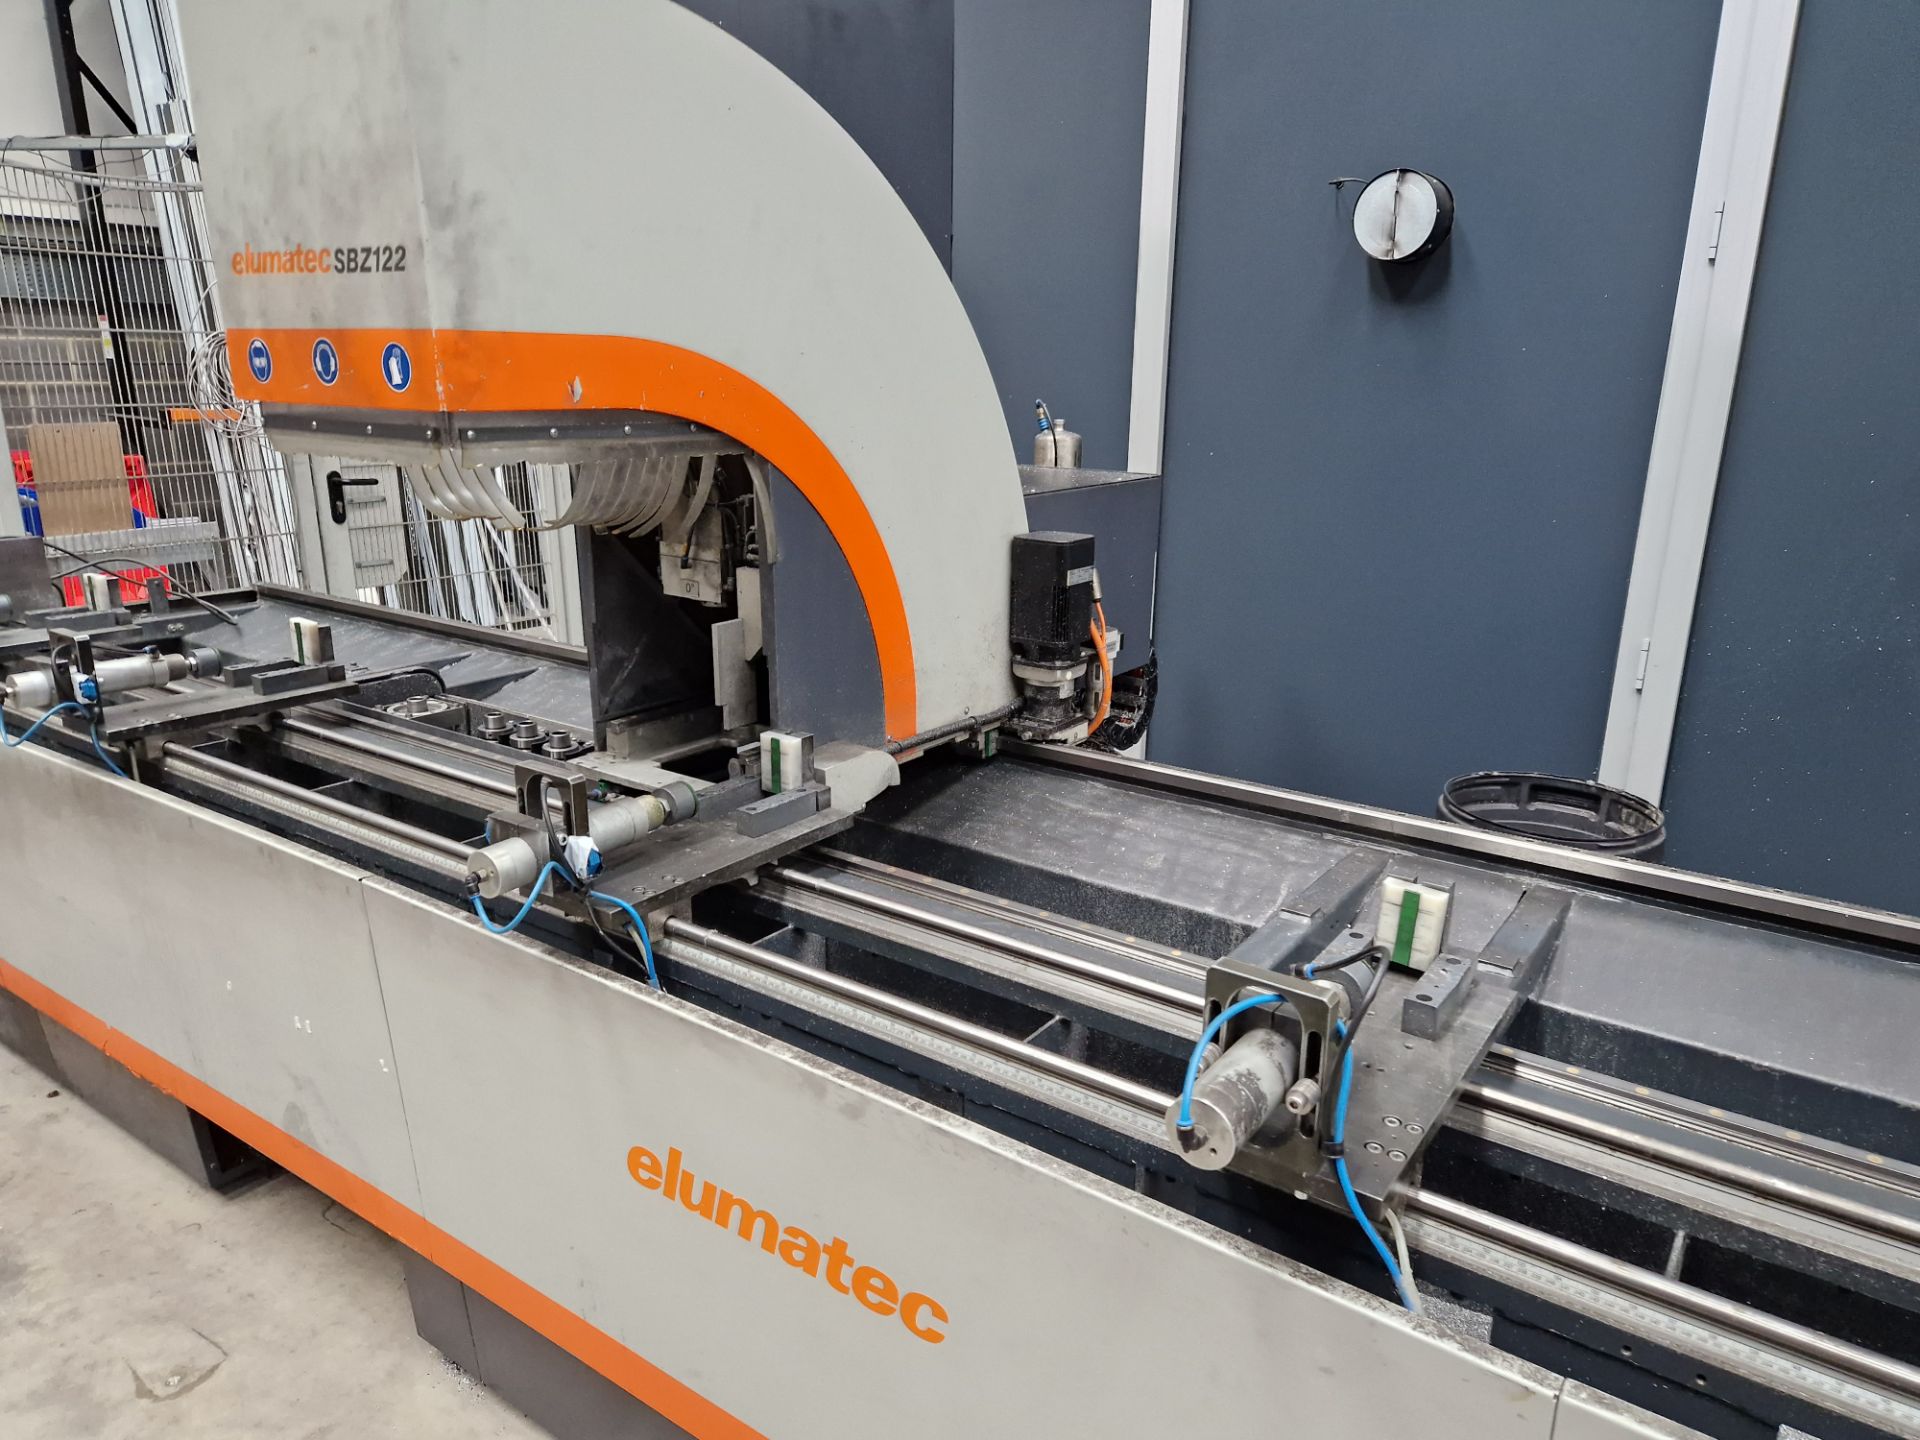 elumatec SBZ 122/33 CNC Profiling Machine, Serial No. 1223330678, Year of Manufacture 2014 with Sick - Image 5 of 8